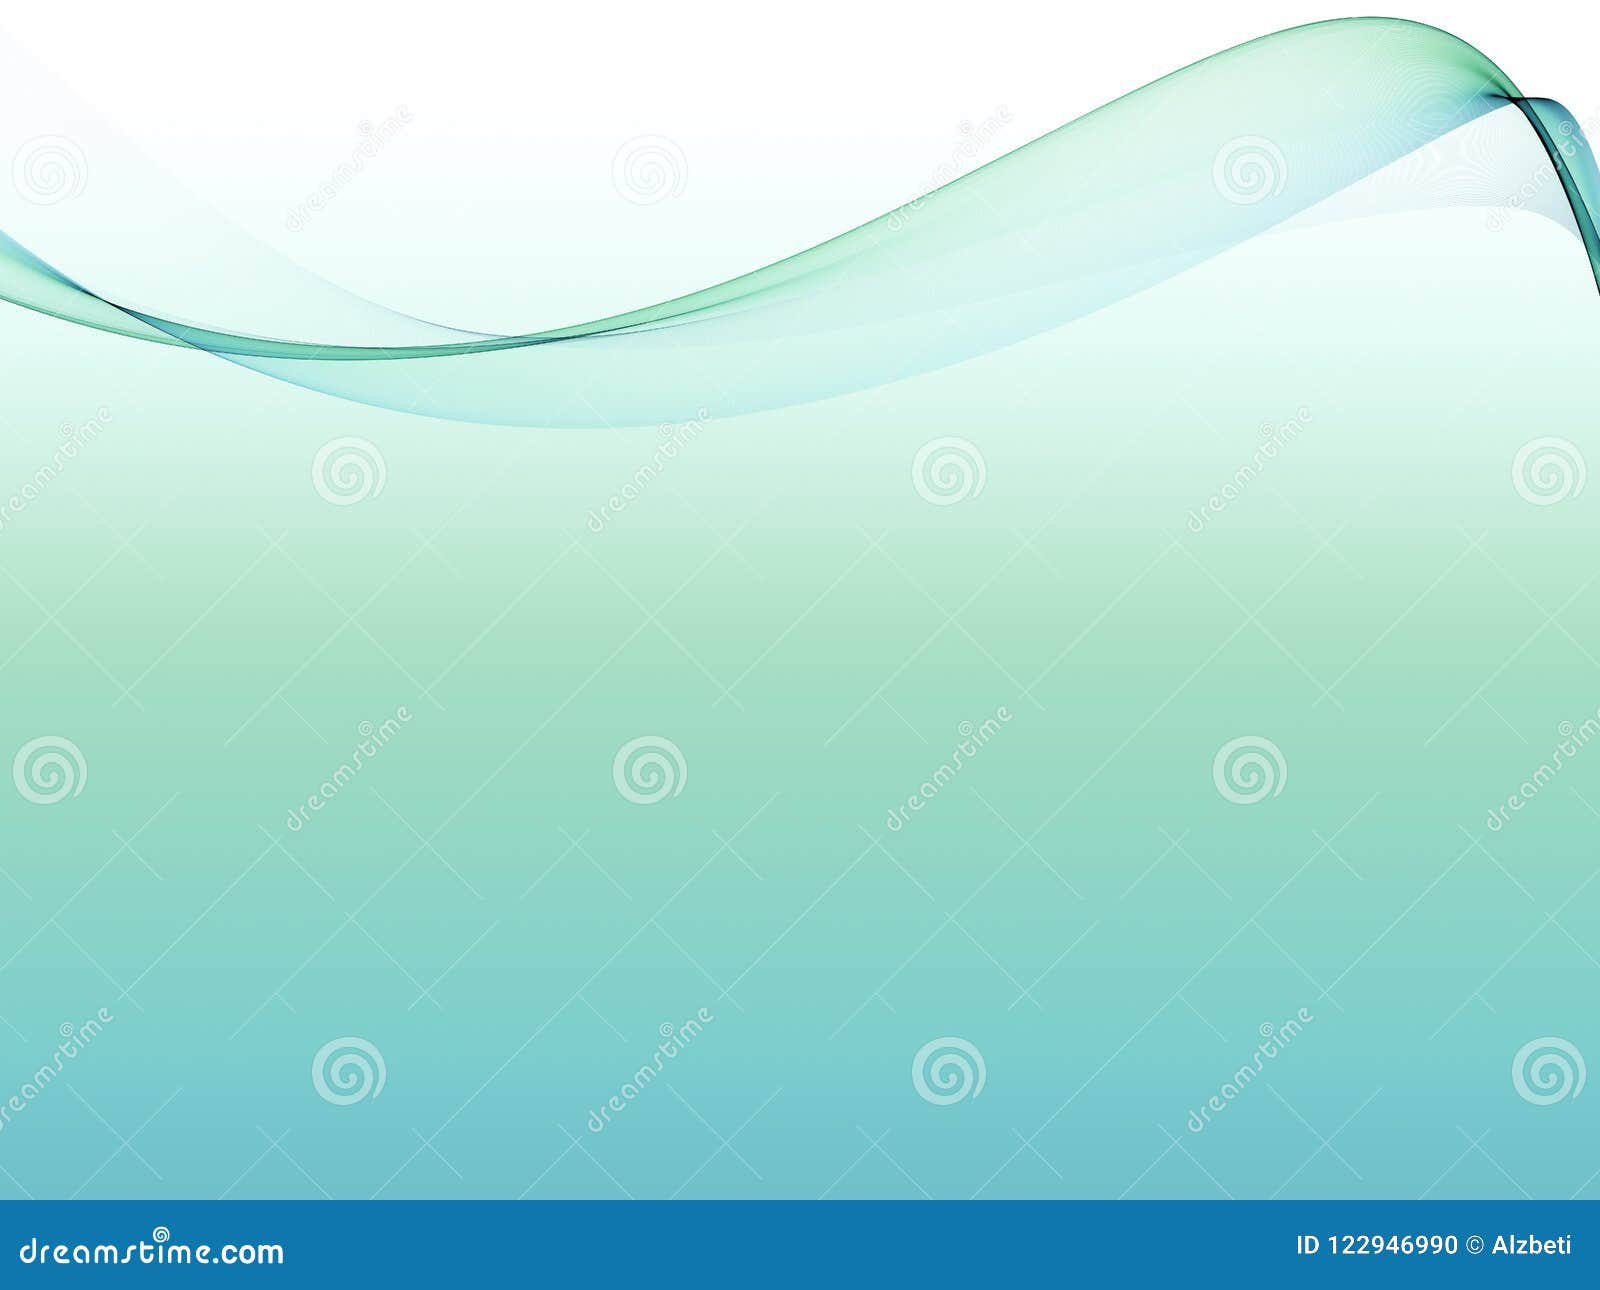 professional background images for ppt